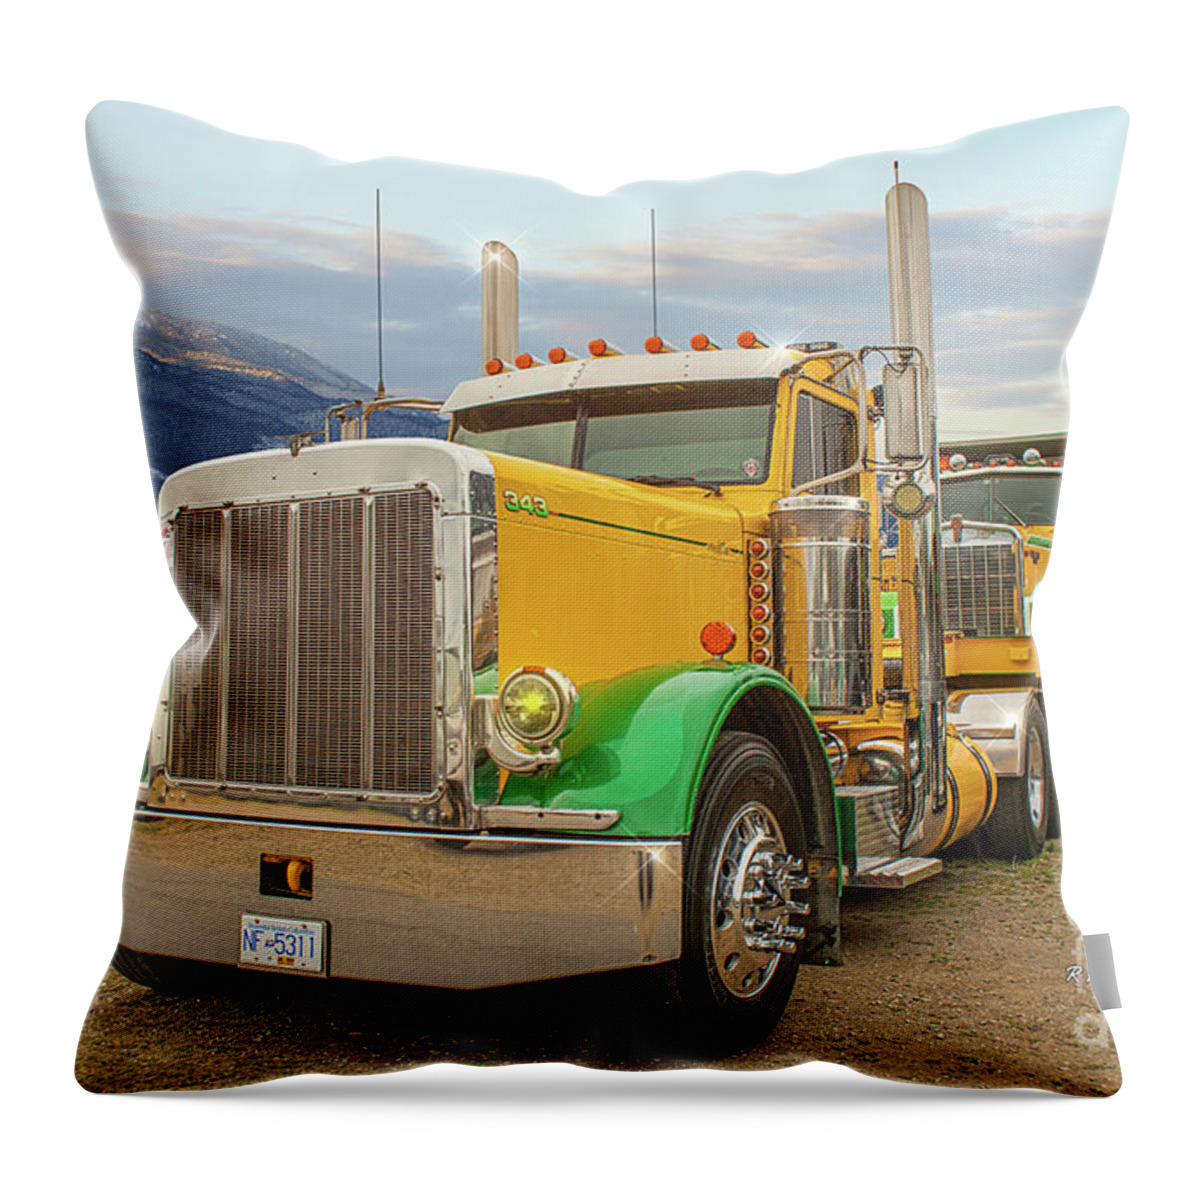 Big Rigs Throw Pillow featuring the photograph Catr9381-19 by Randy Harris